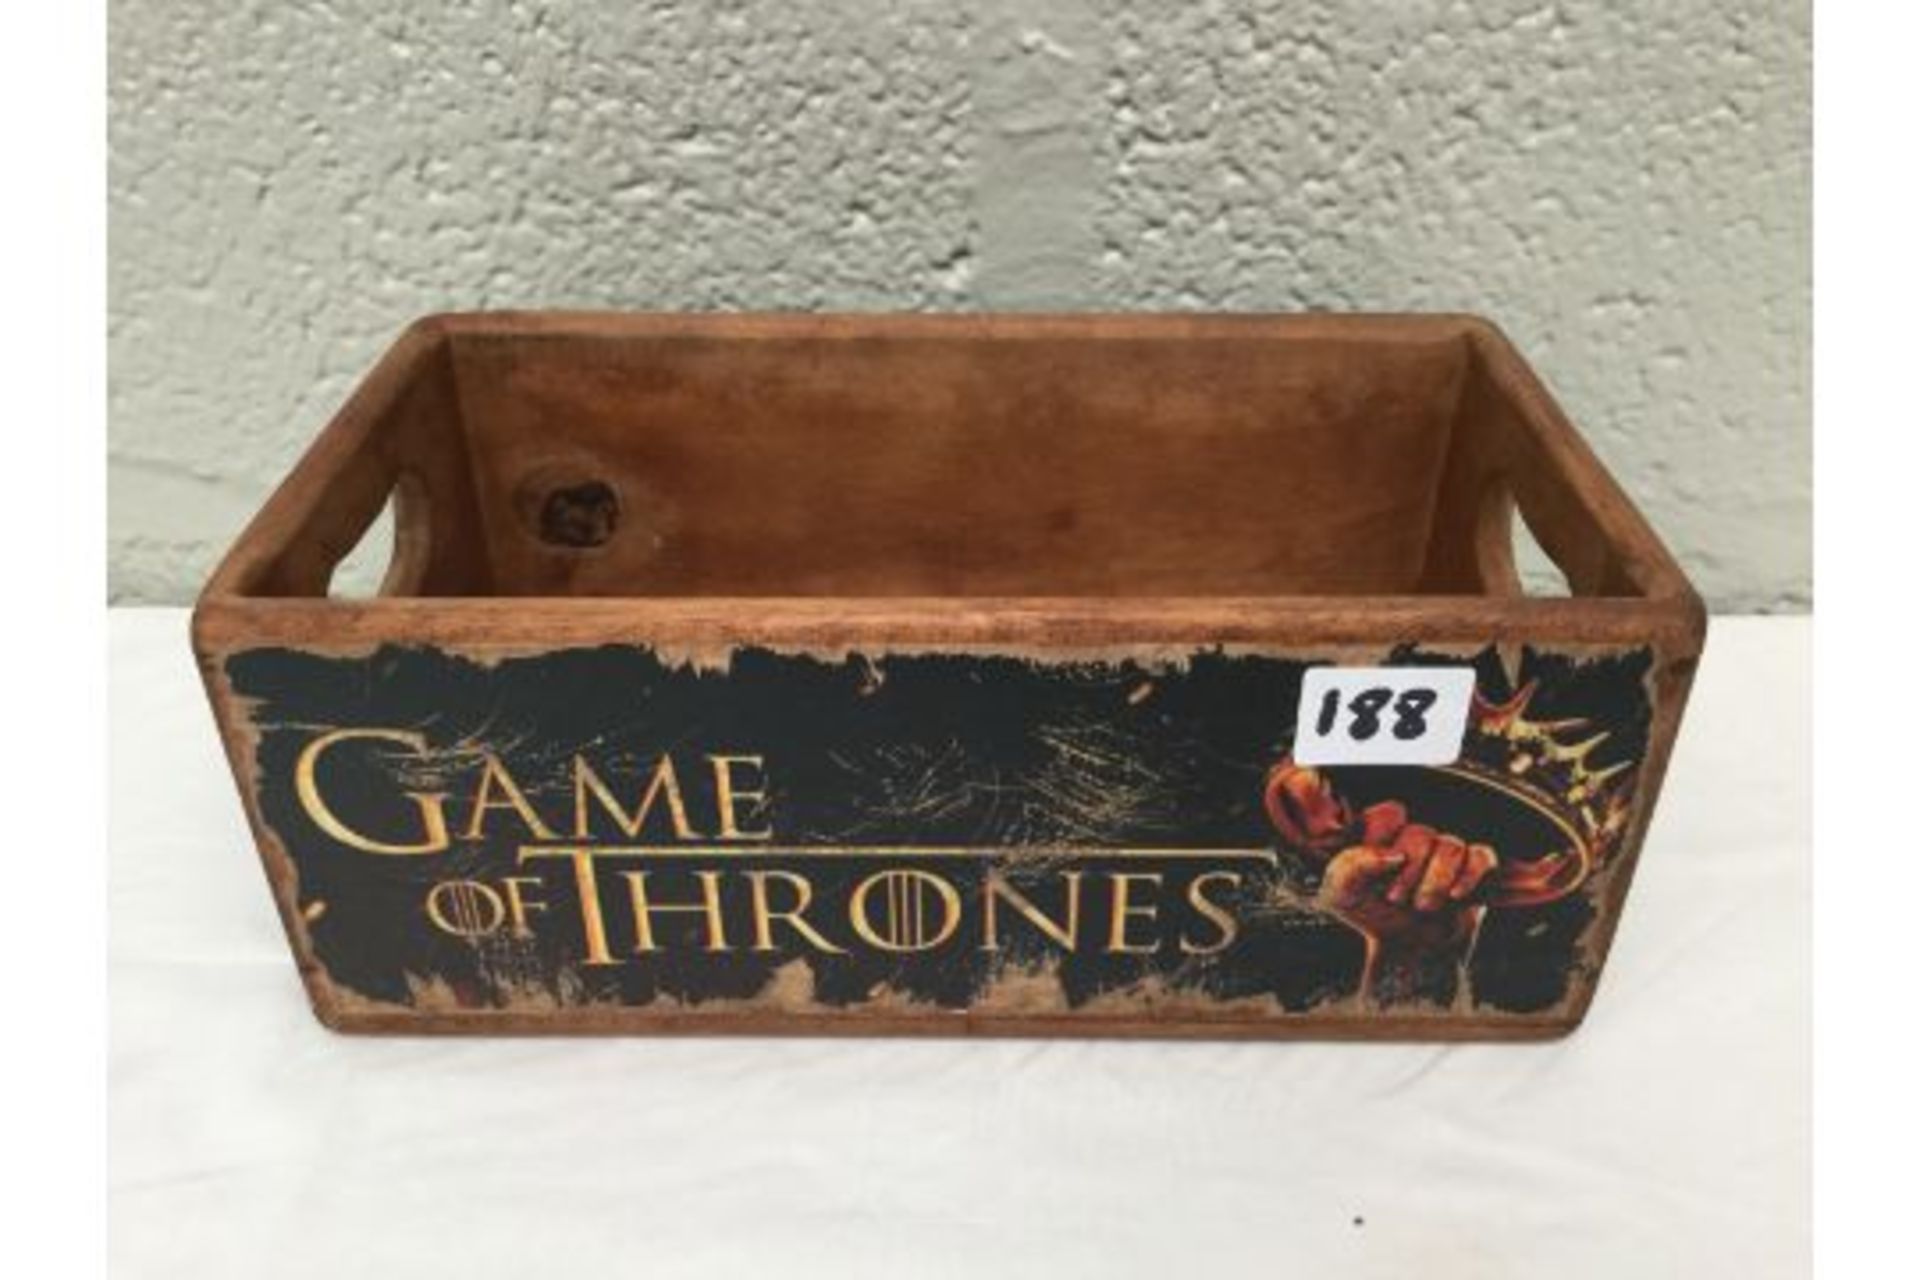 NEW GAME OF THRONES WOODEN STORAGE BOX